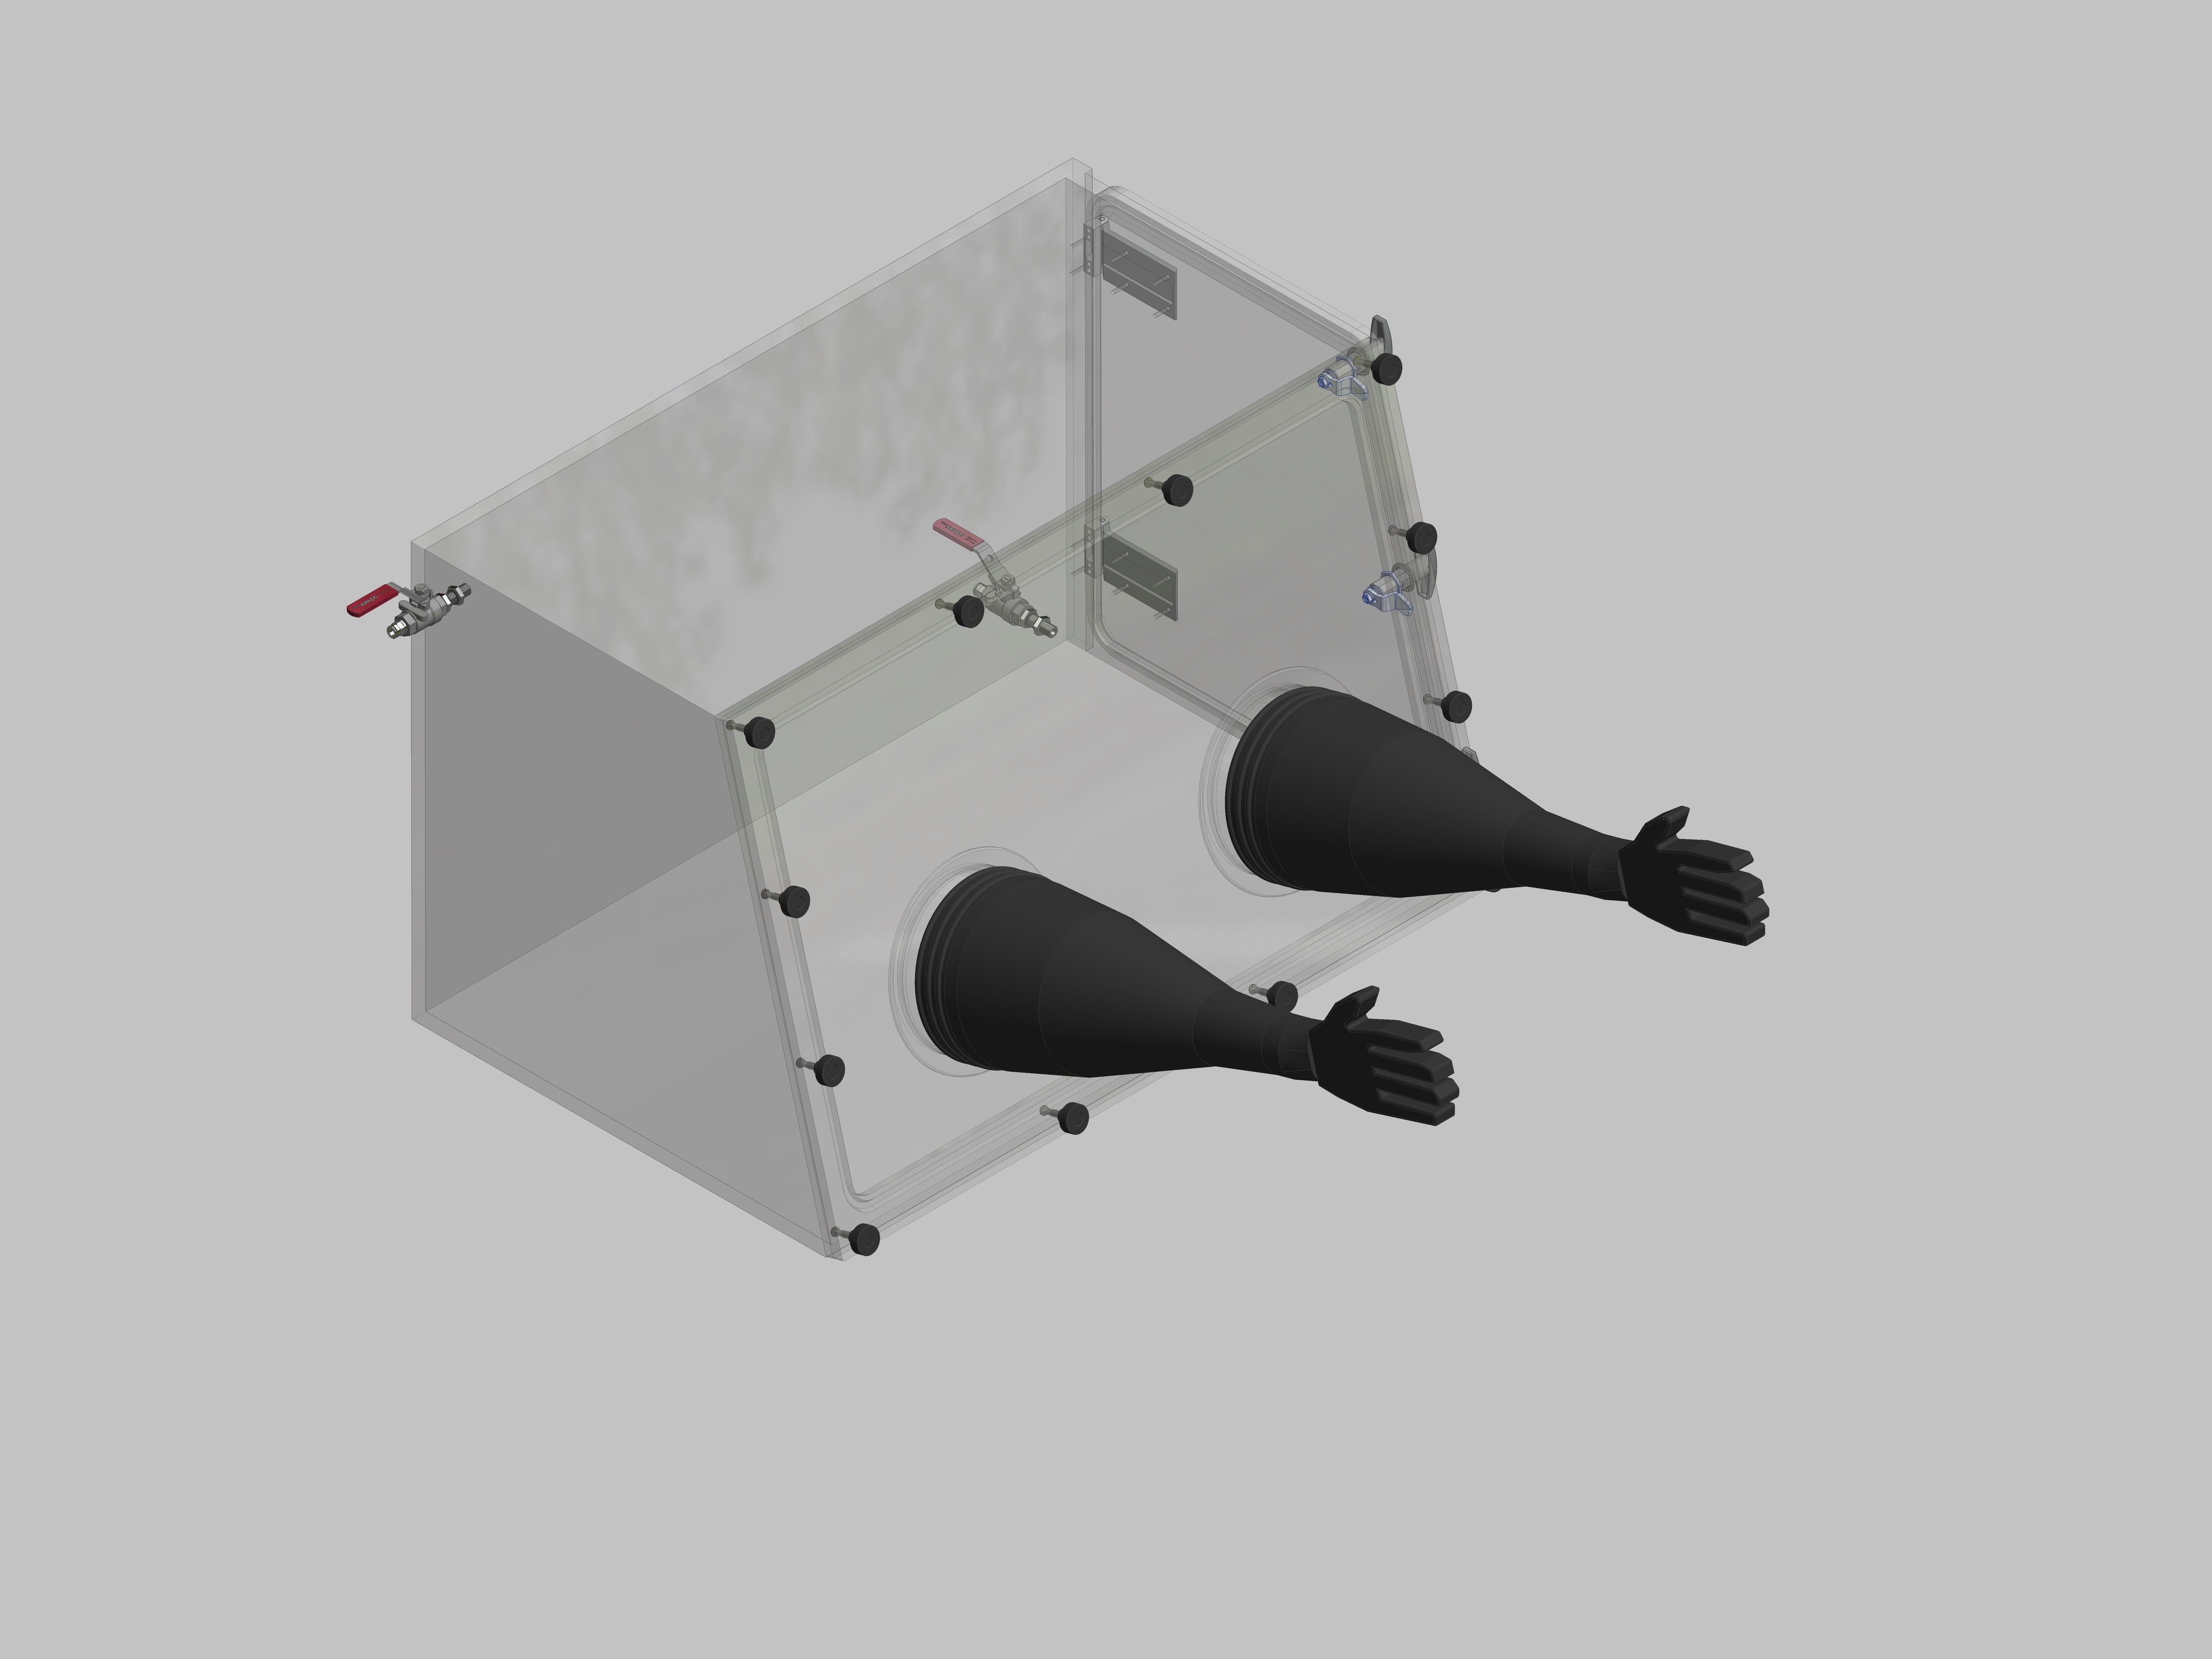 Glovebox made of acrylic &gt; Gas filling: by hand, front design: removable, side design: hinged doors